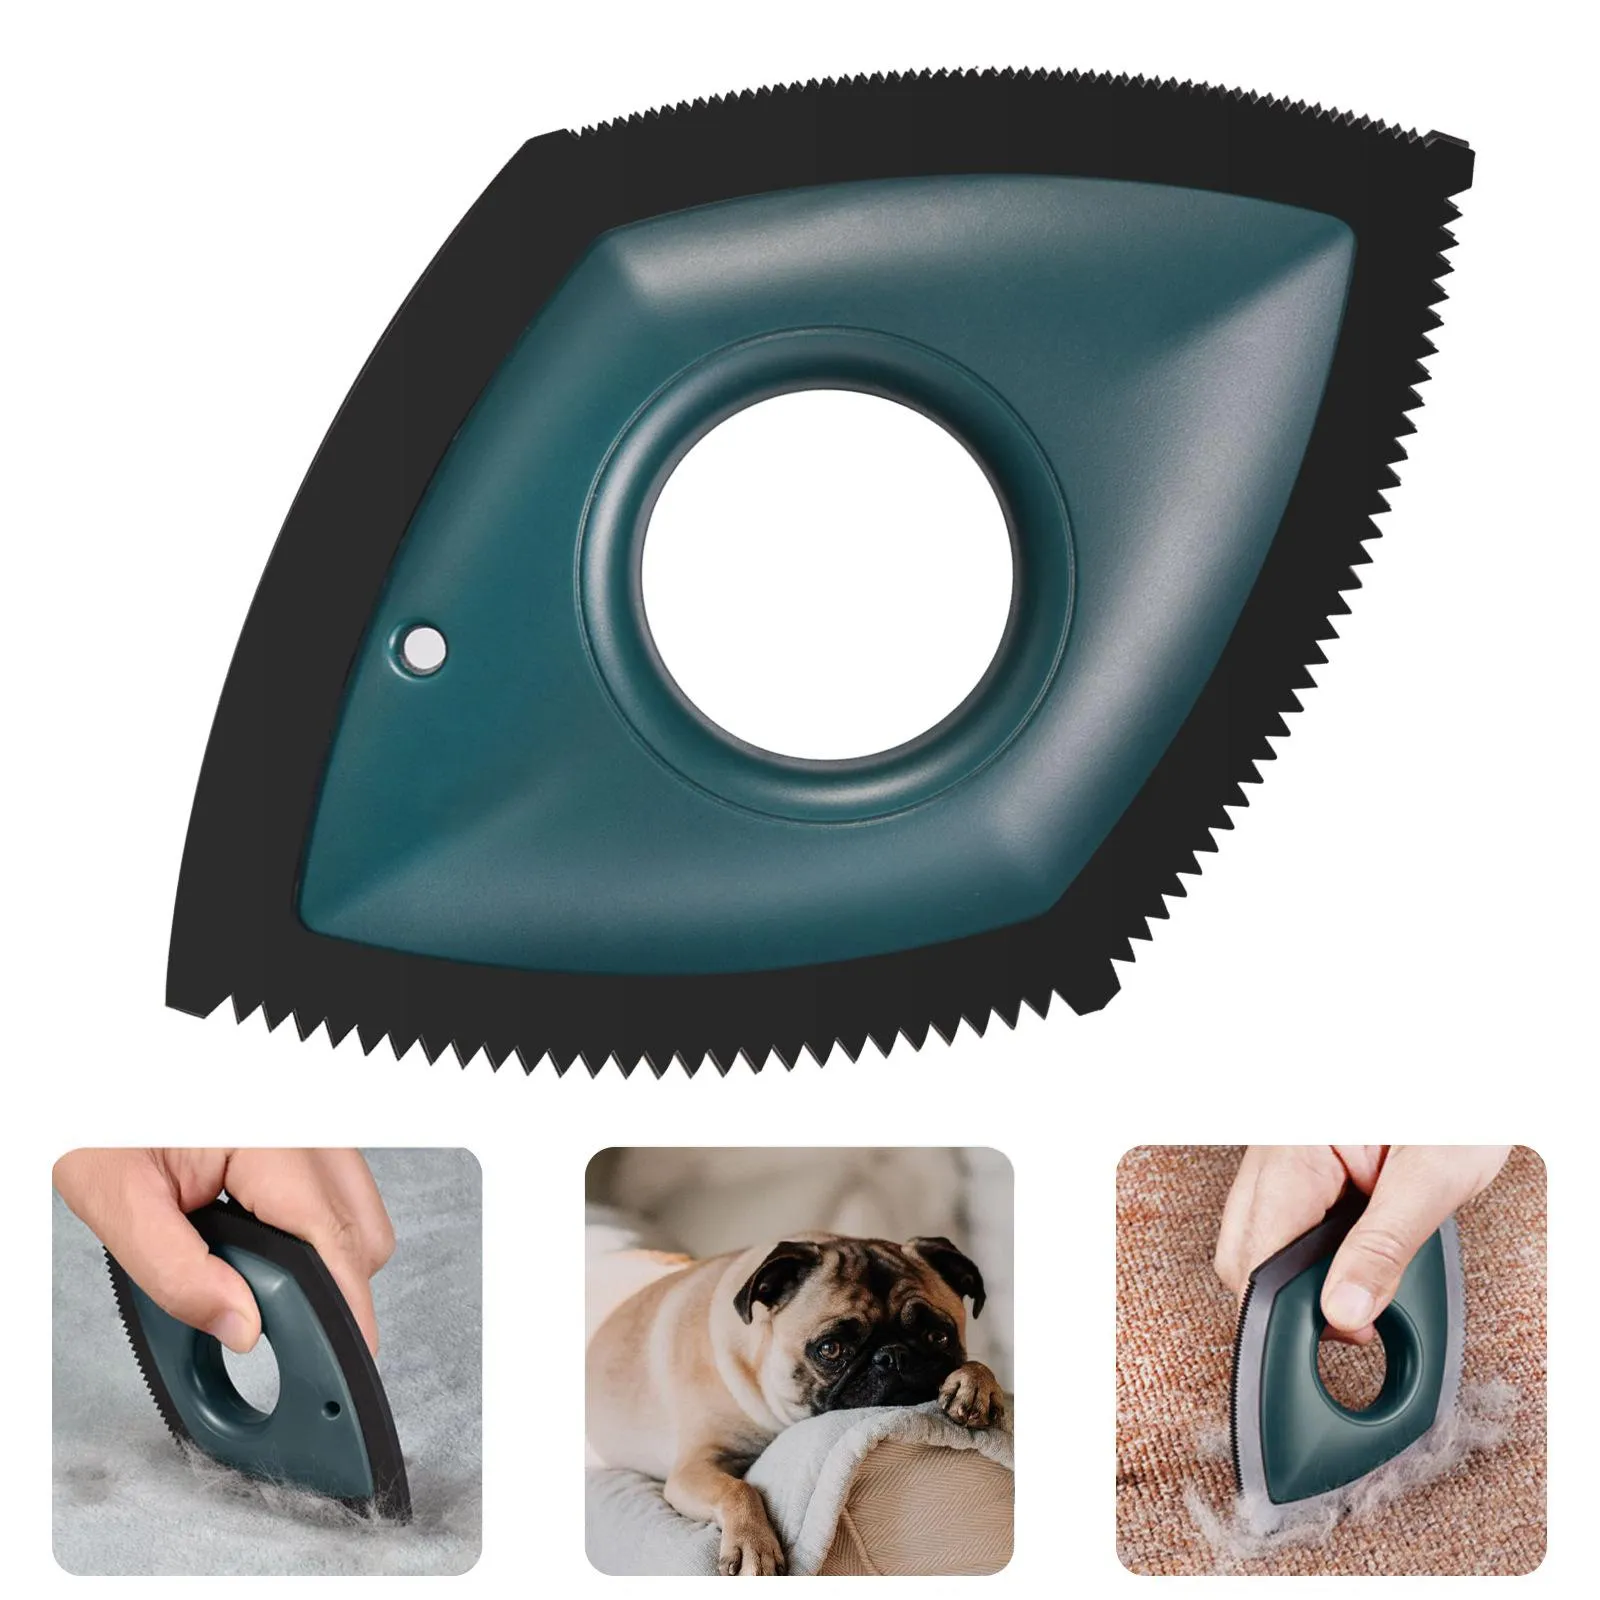 Professional Mini Pet Hair Detailer Dog Cat Remover Brush for Cleaning Carpets, Sofas, Home Furnishings and Car Interiors